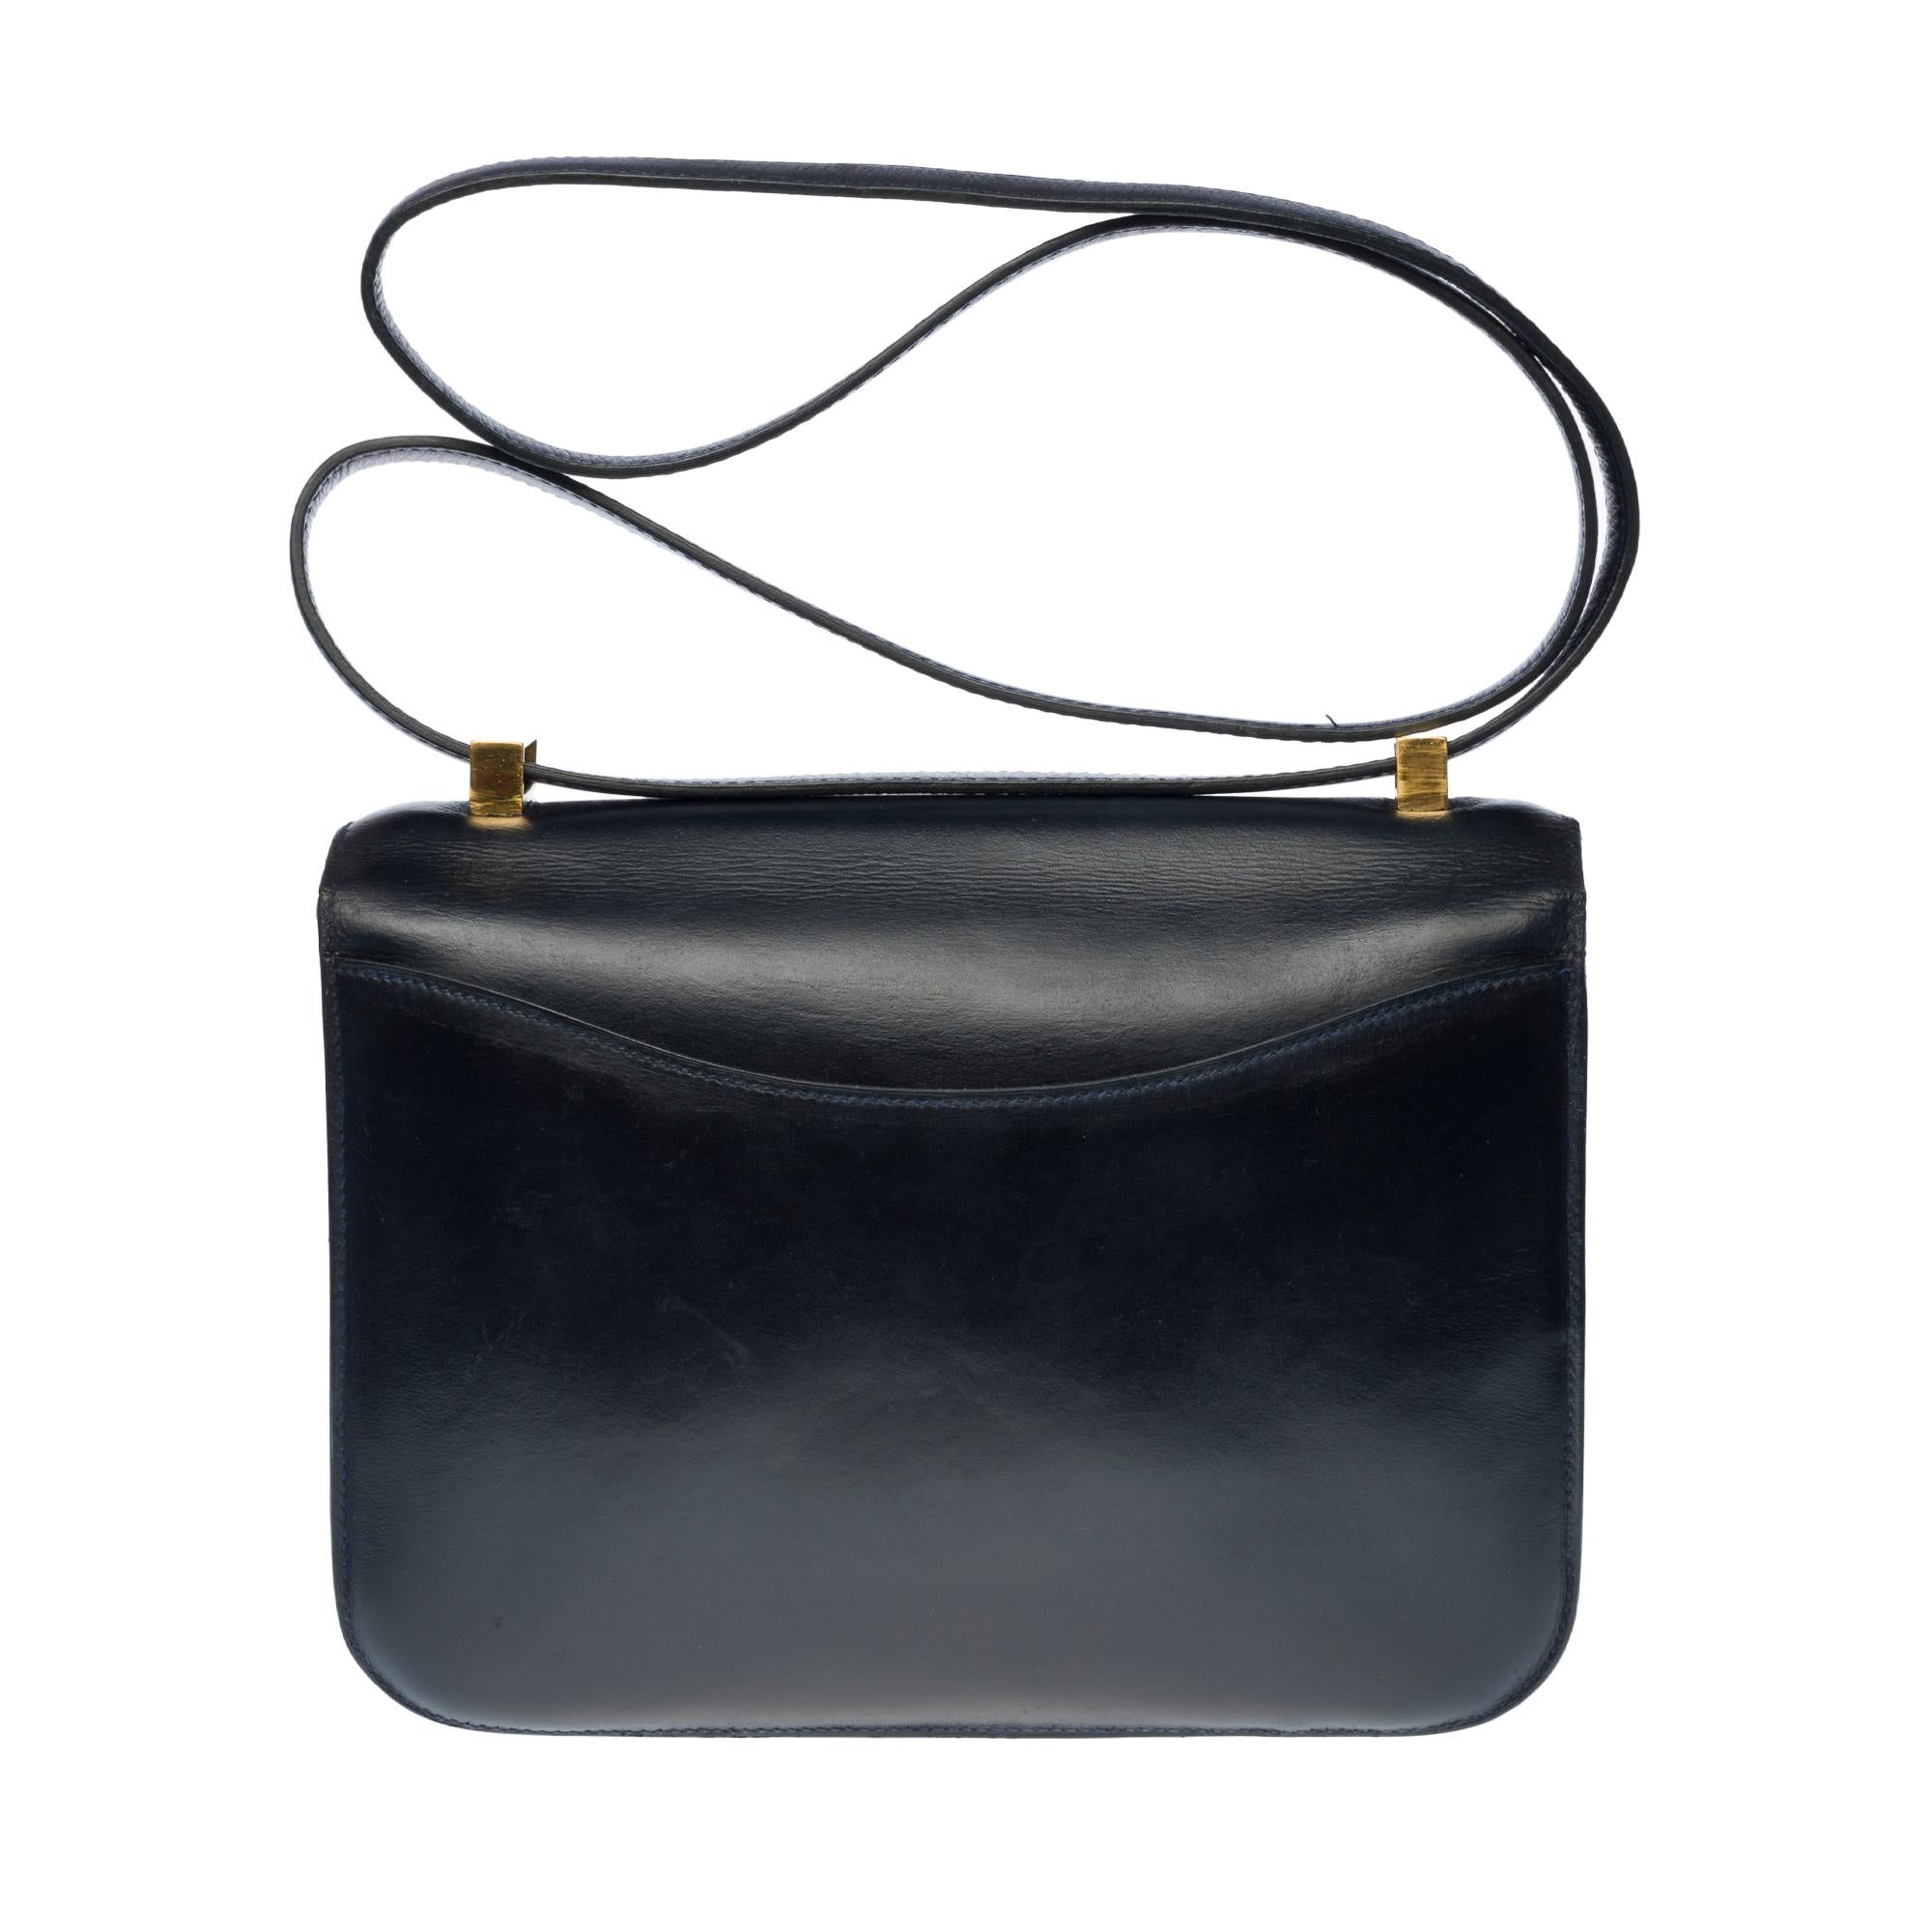 Splendid Hermes Constance 23 cm vintage handbag in navy blue box, gold metal trim, transformable handle in navy leather allowing a hand or shoulder support.

Closure with H buckle on flap.
A patch pocket on the back of the bag.
Lining in navy